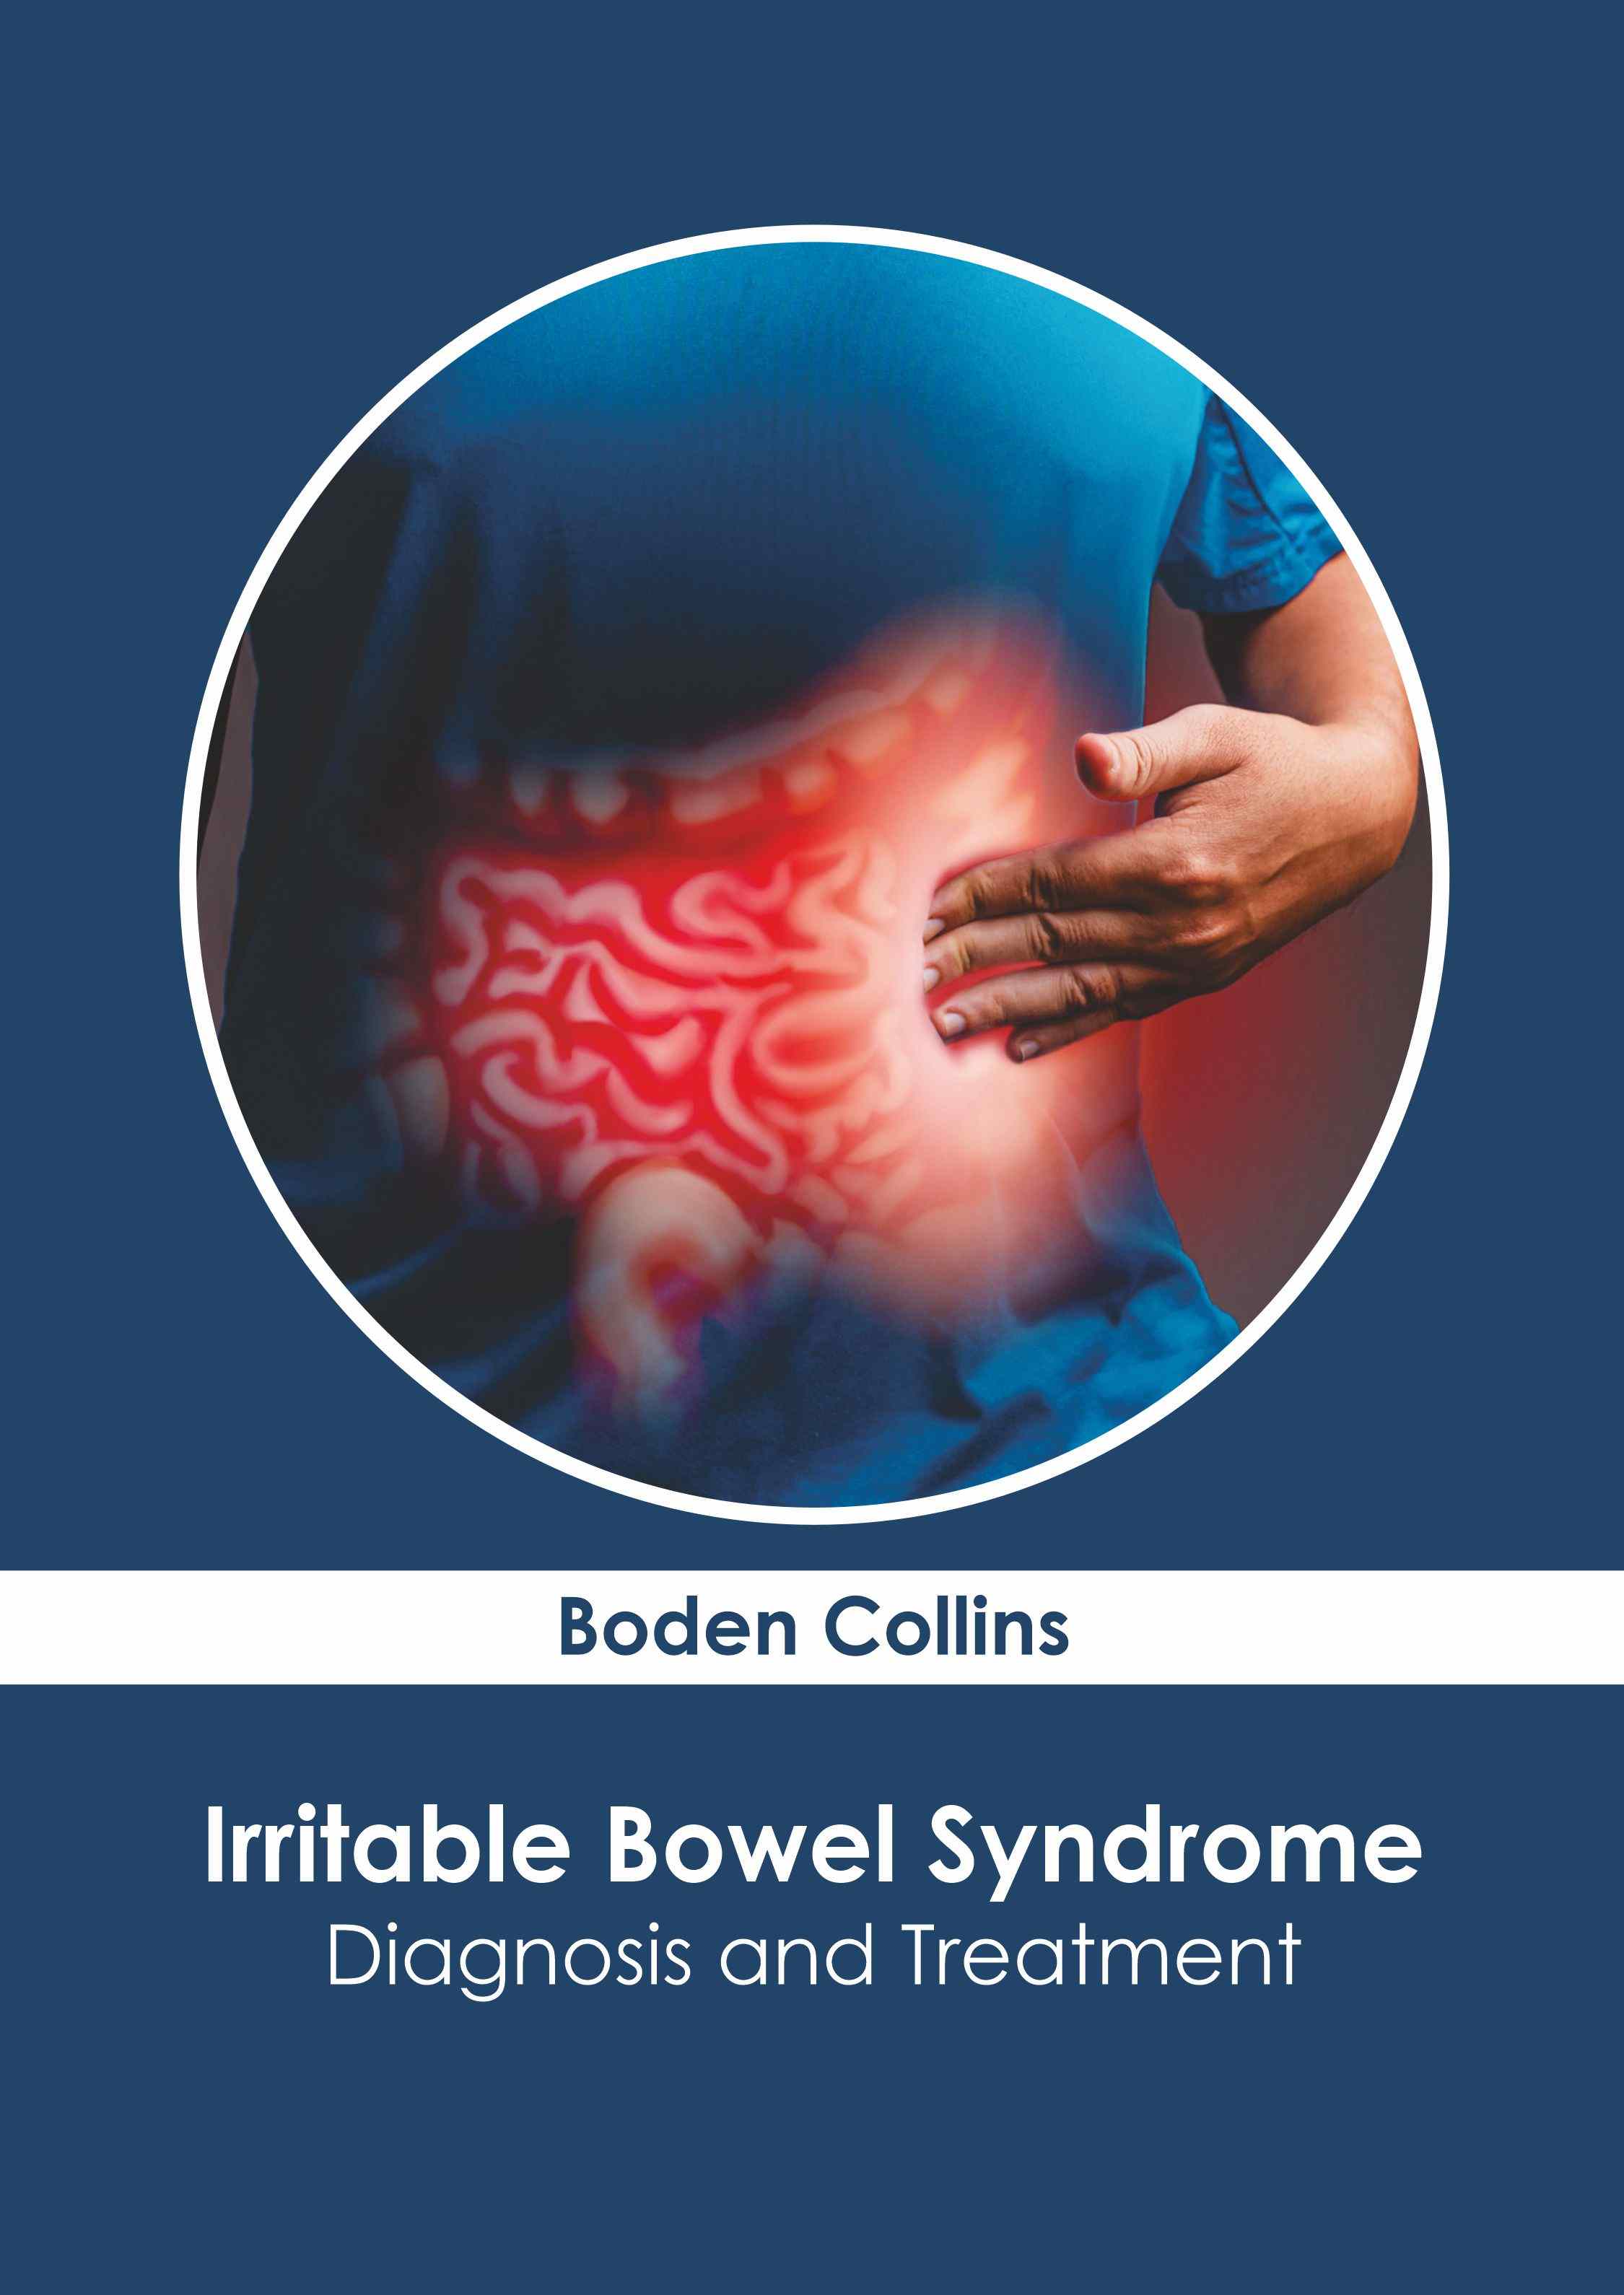 

exclusive-publishers/american-medical-publishers/irritable-bowel-syndrome-diagnosis-and-treatment-9798887406459